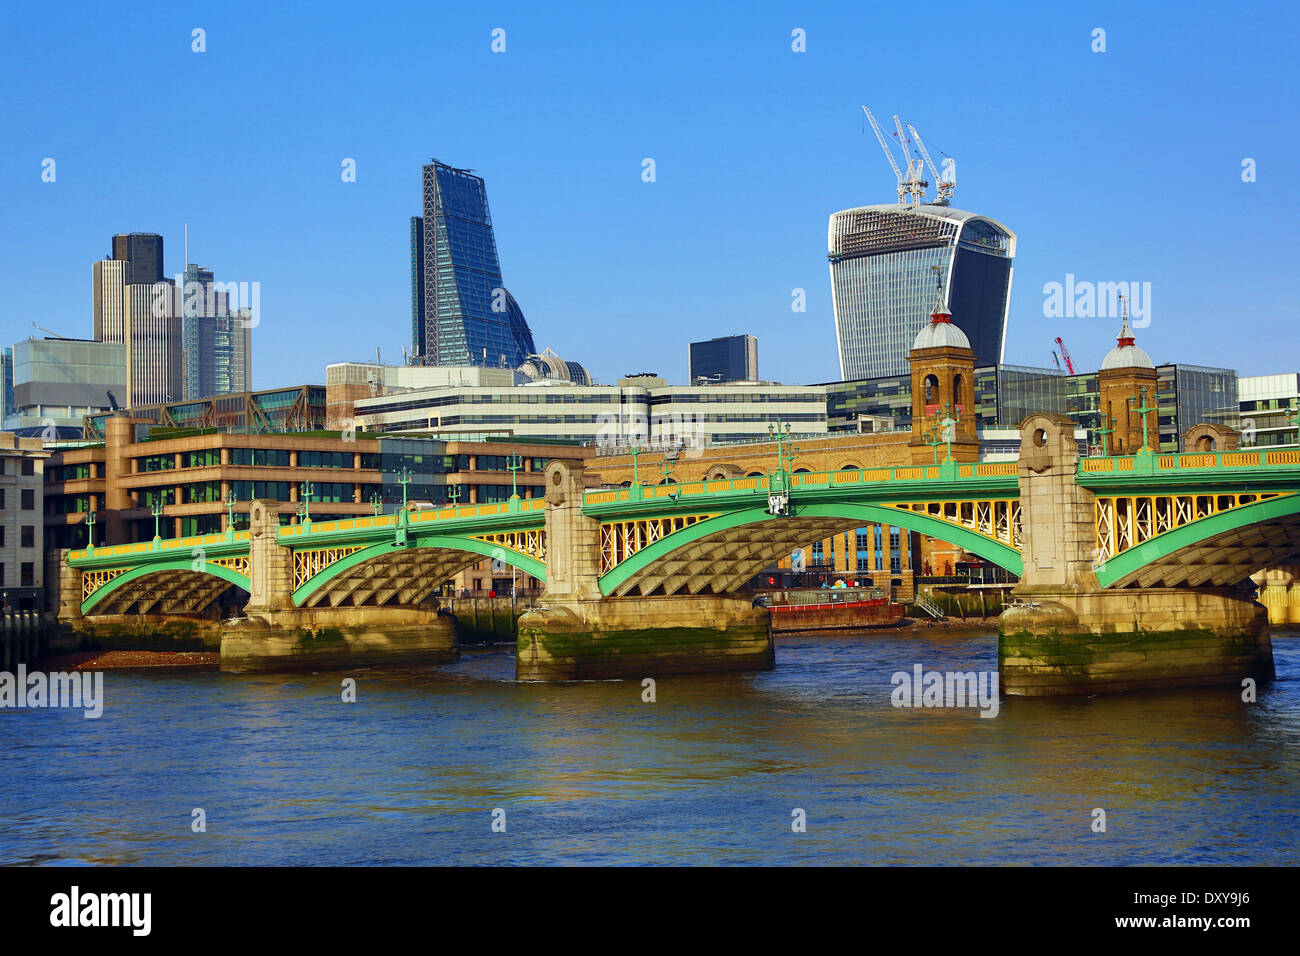 River Thames with Southwark Bridge and the City of London skyline in London, England Stock Photo